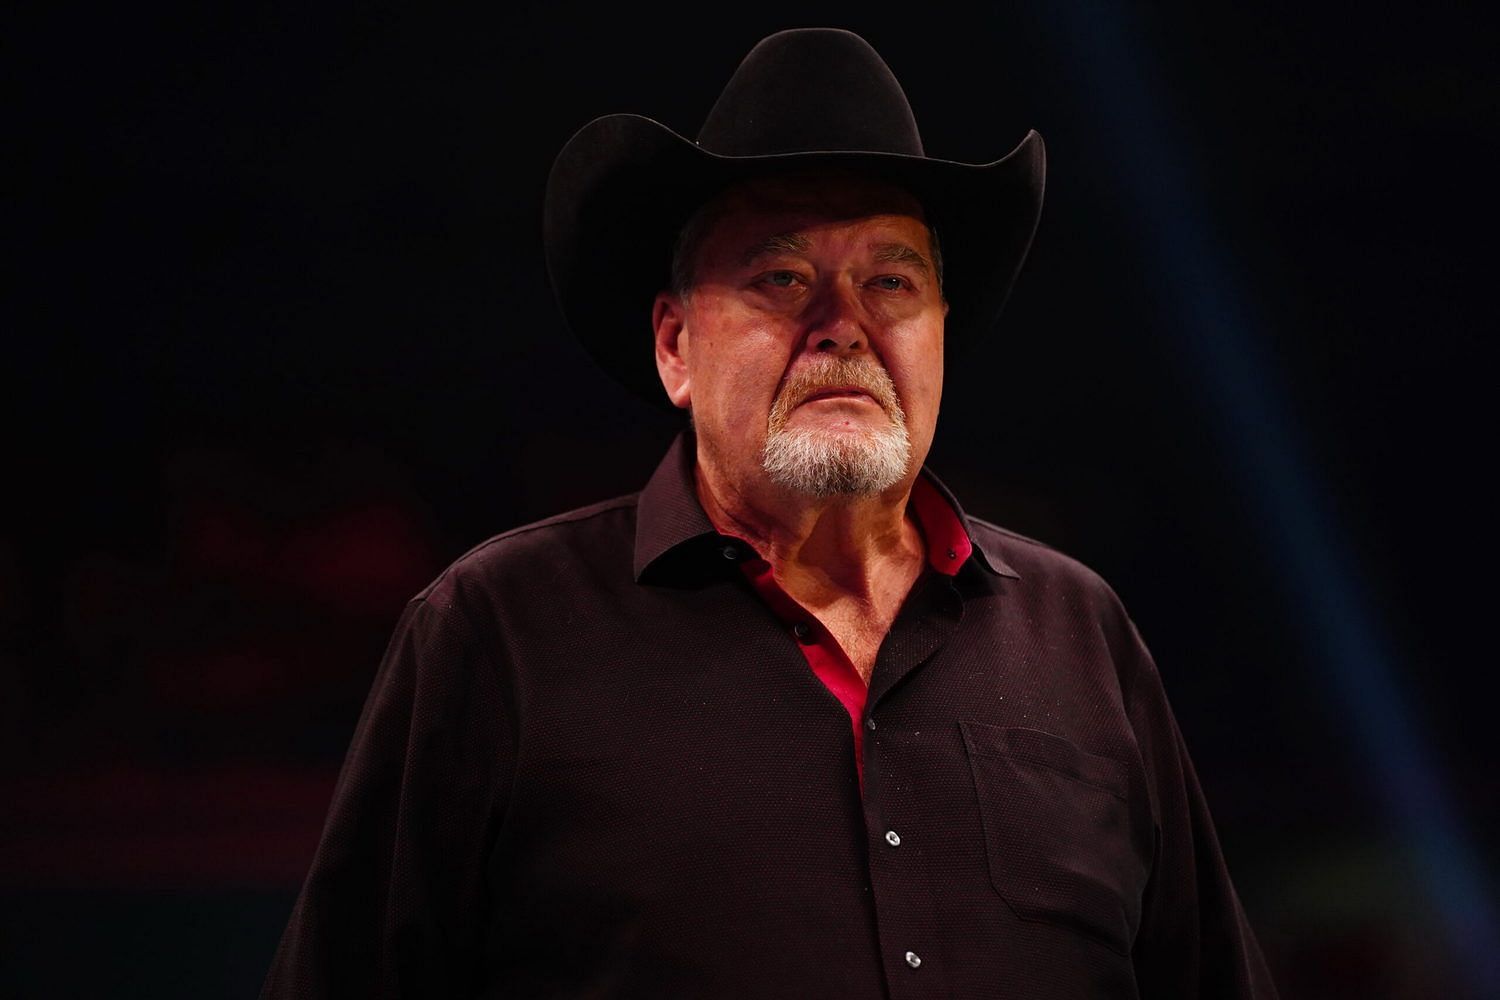 Jim Ross is a former WWE commentator